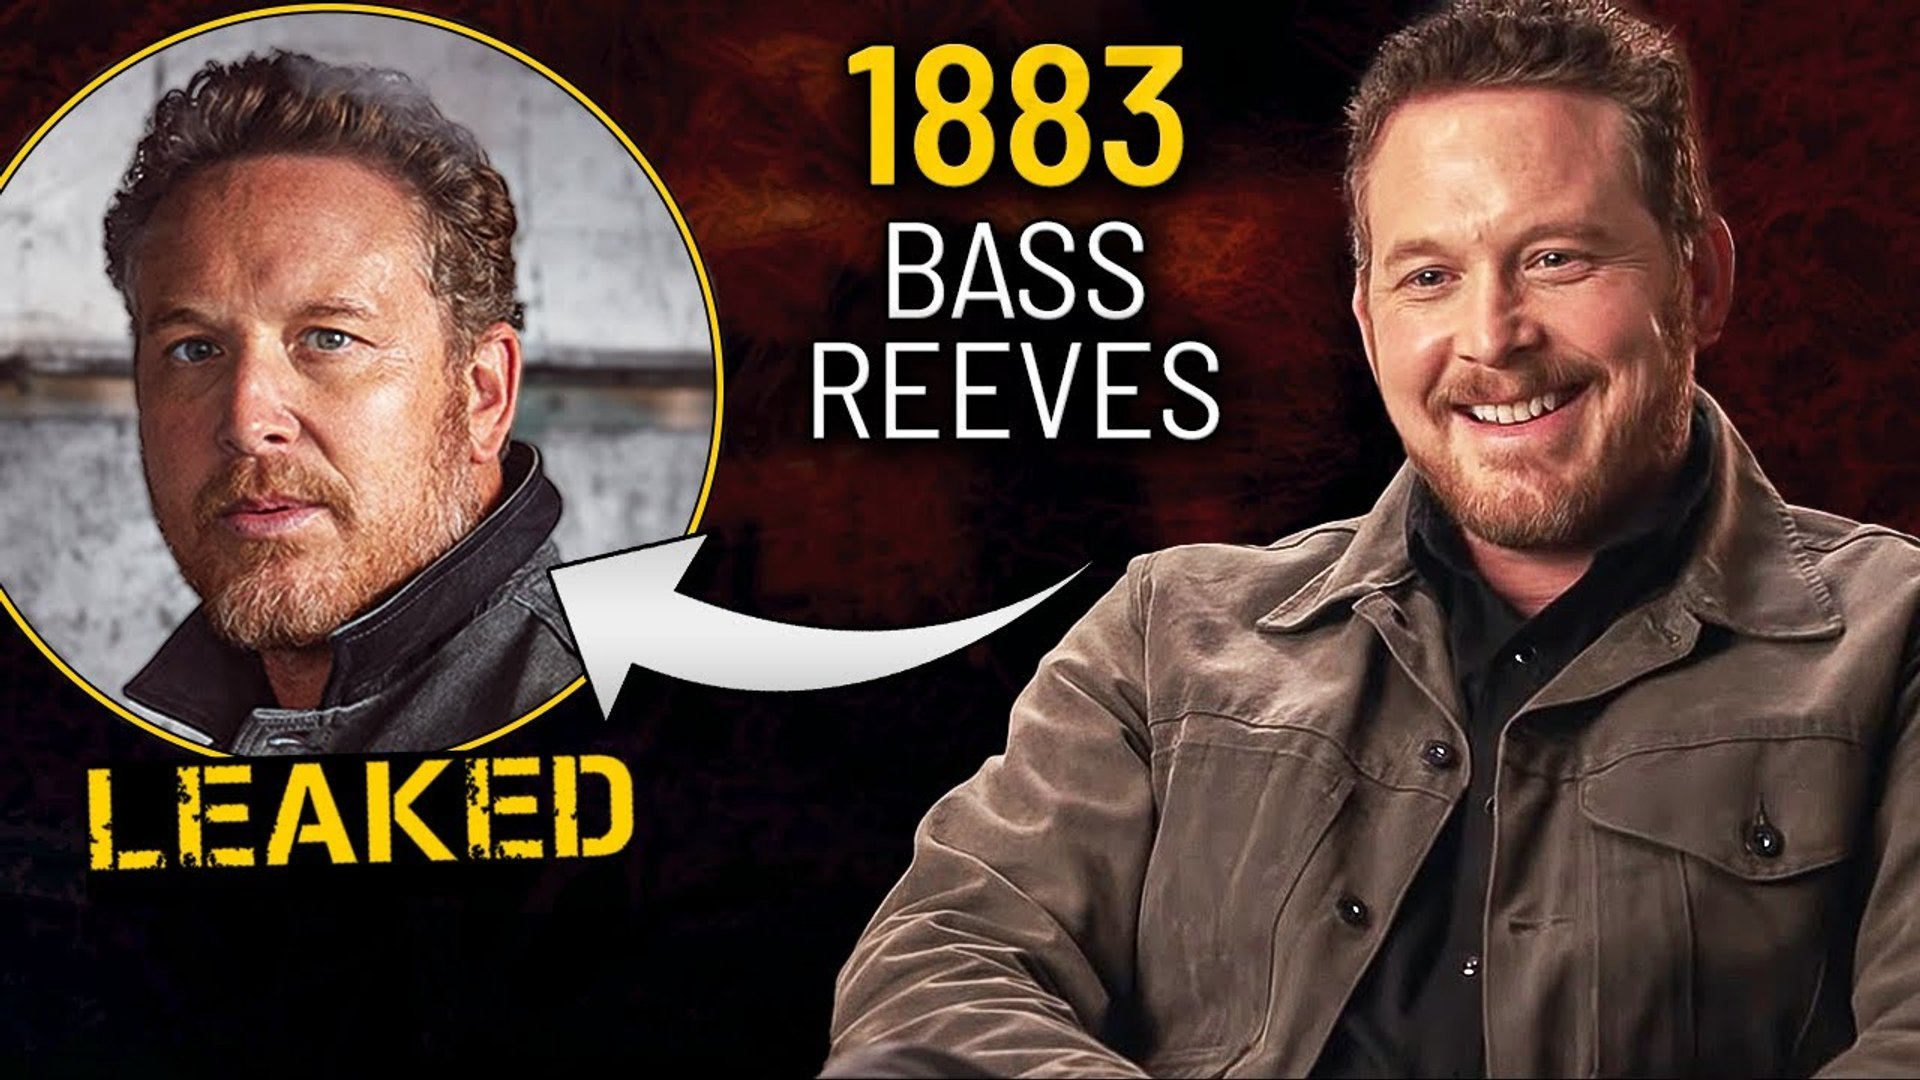 Cole Hauser Joins The Cast of 1883 The Bass Reeves Story - video ...